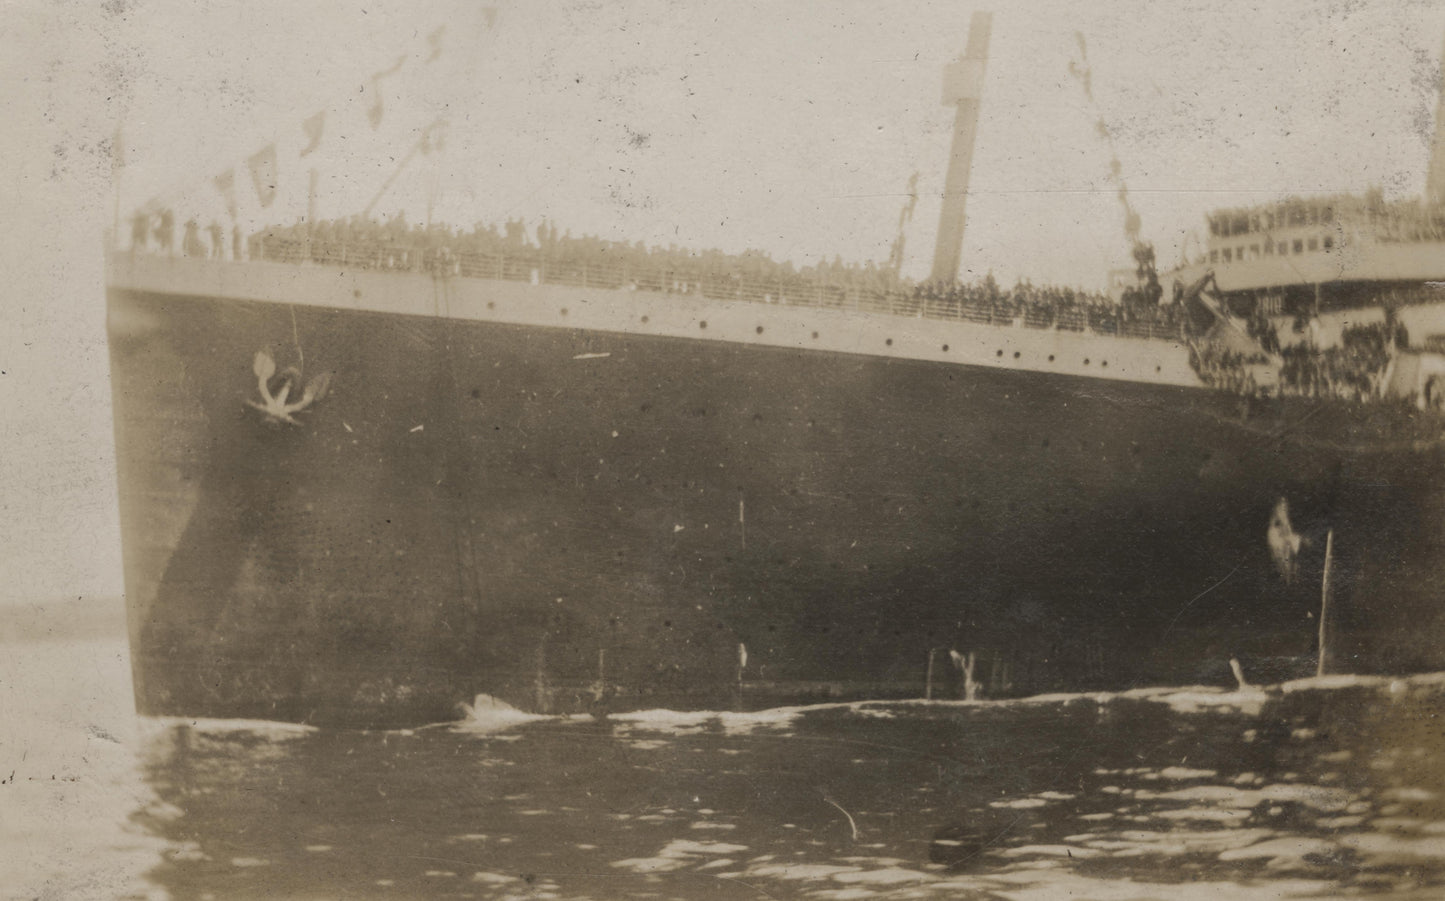 RMS Olympic Bringing home the 28th Nova Scotia Regiment, Halifax Harbour